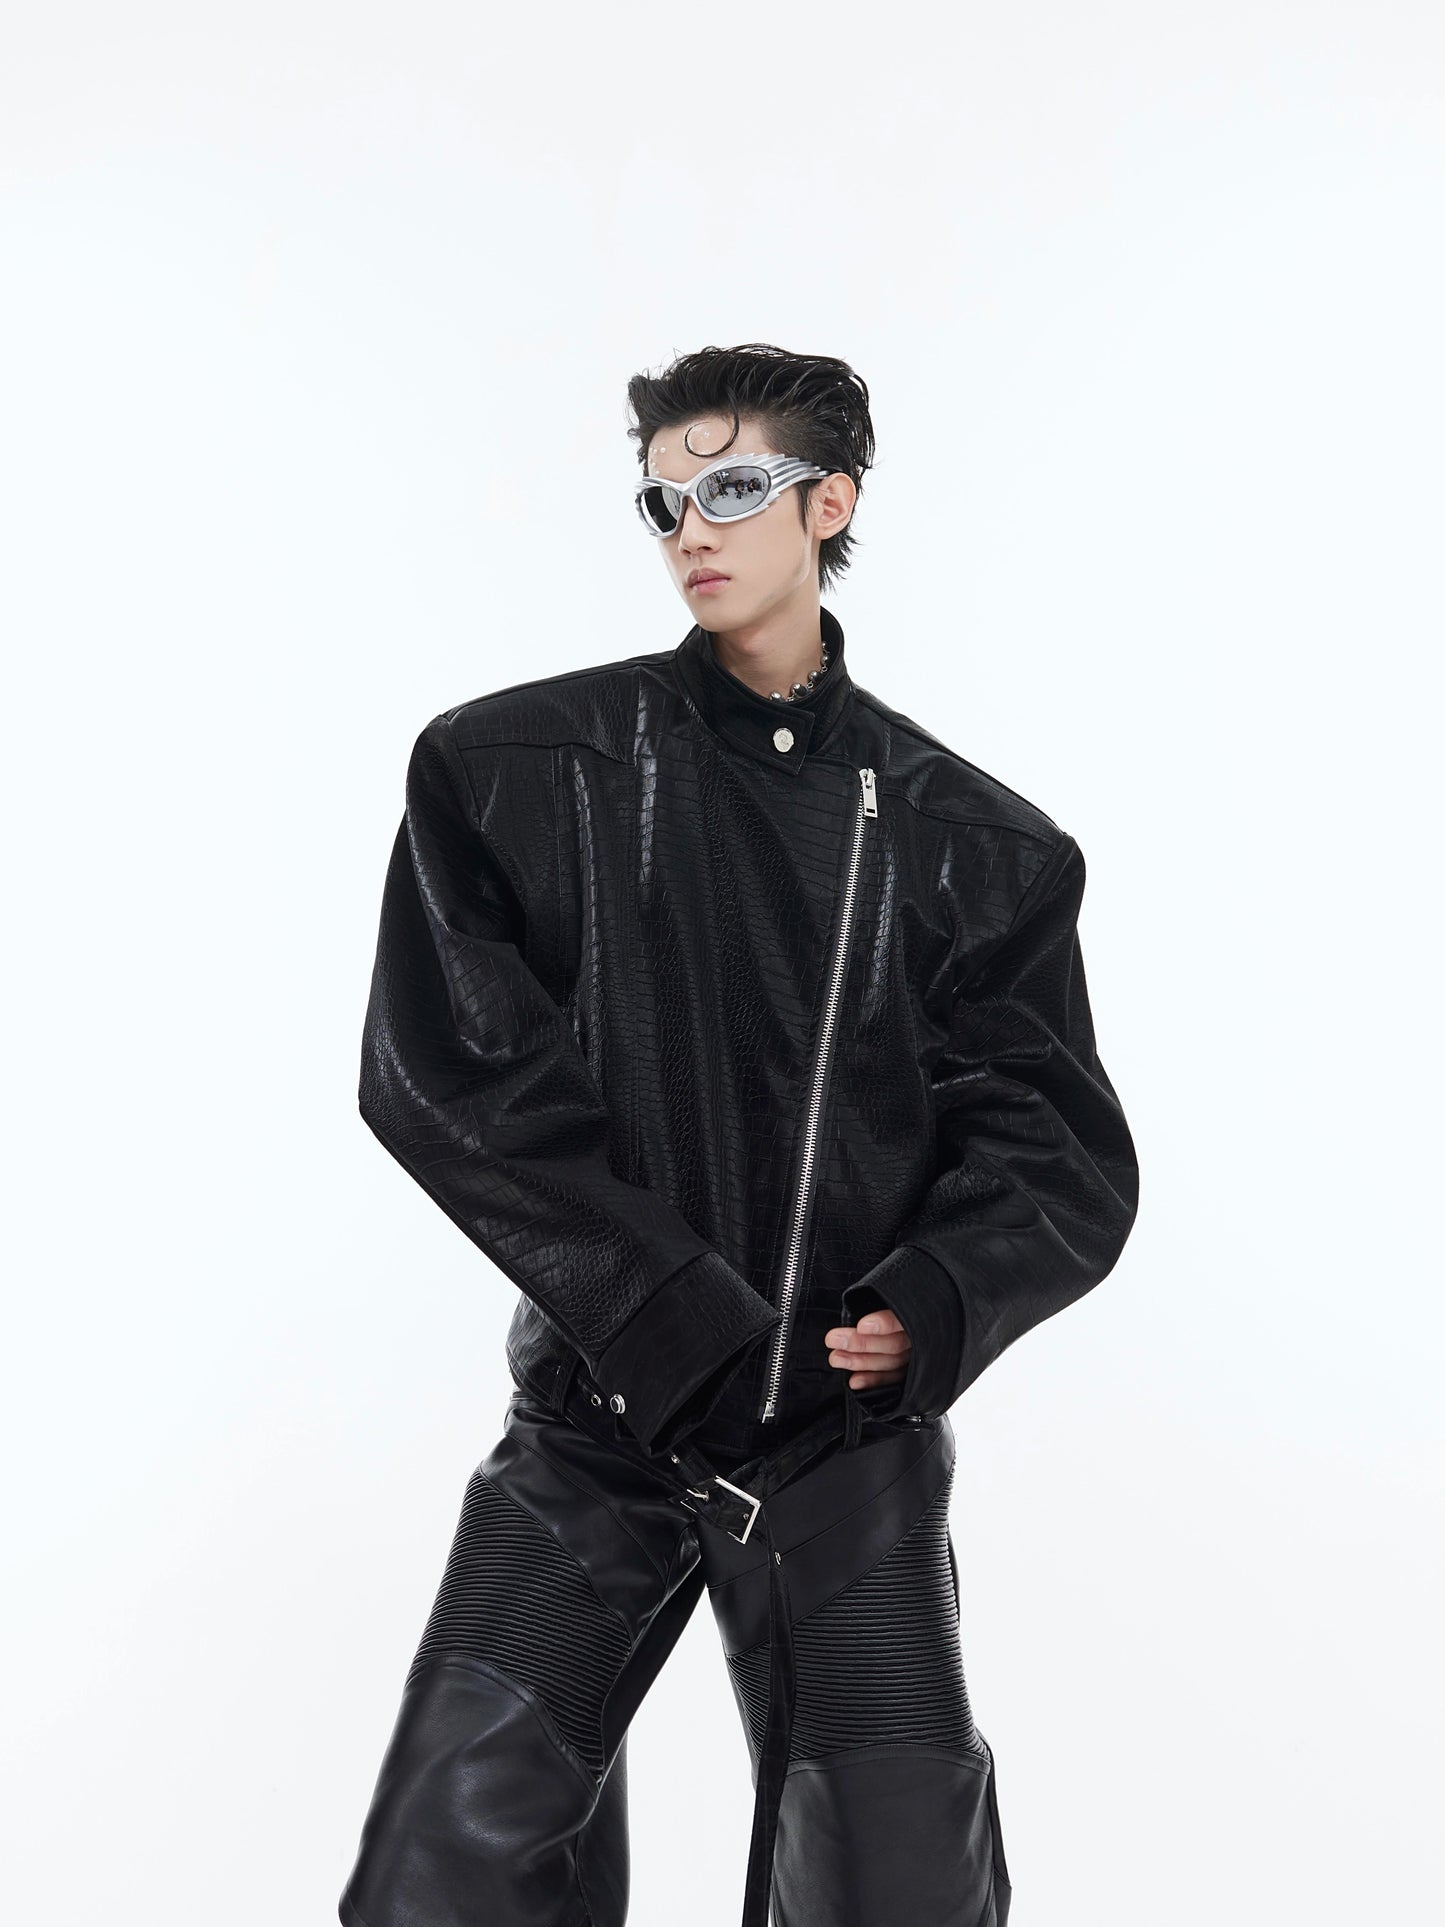 CulturE's original niche deconstructed crocodile-embossed leather jacket with a cropped silhouette jacket and a metallic design top